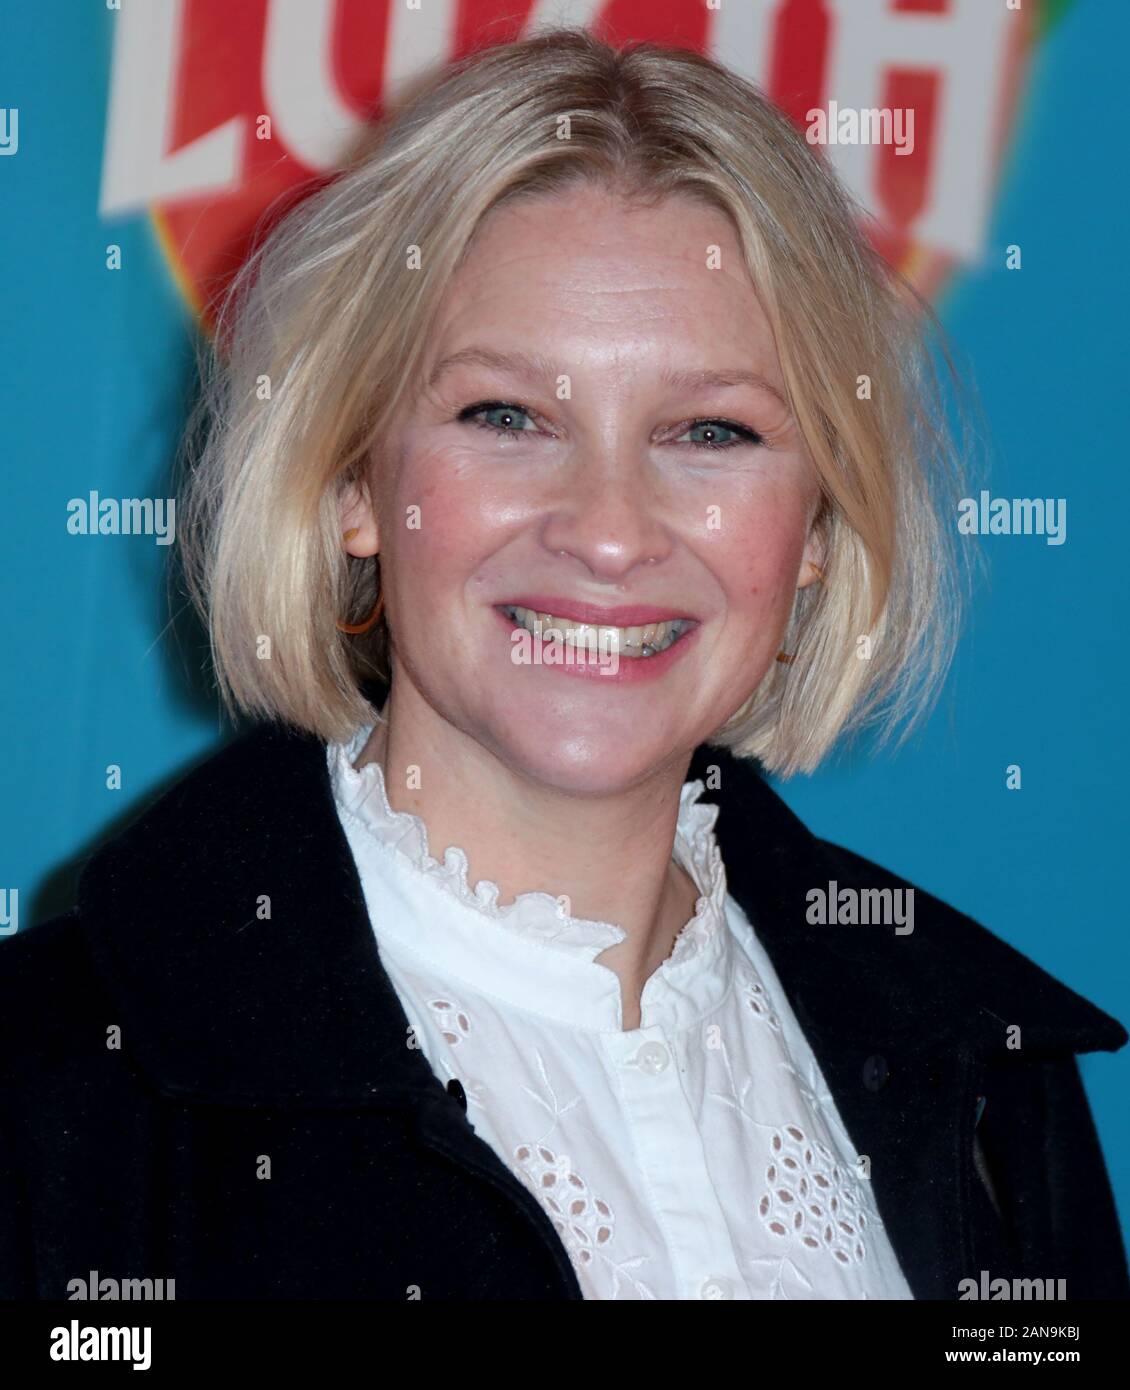 Images joanna page Things Everyone